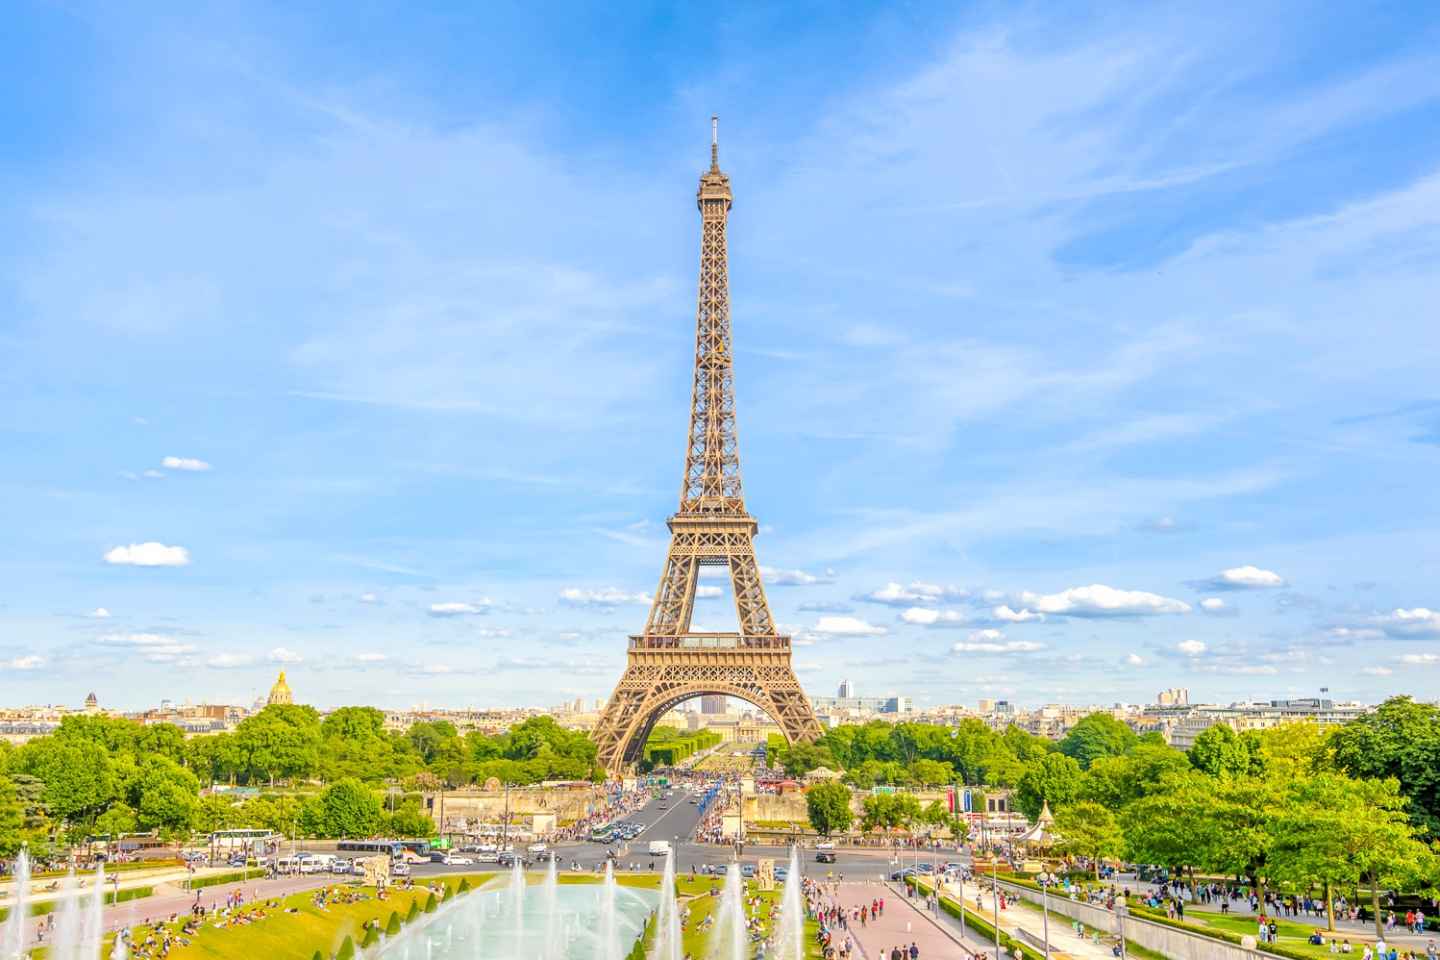 10 Historical Places In Paris, France - Updated 2023 | Trip101